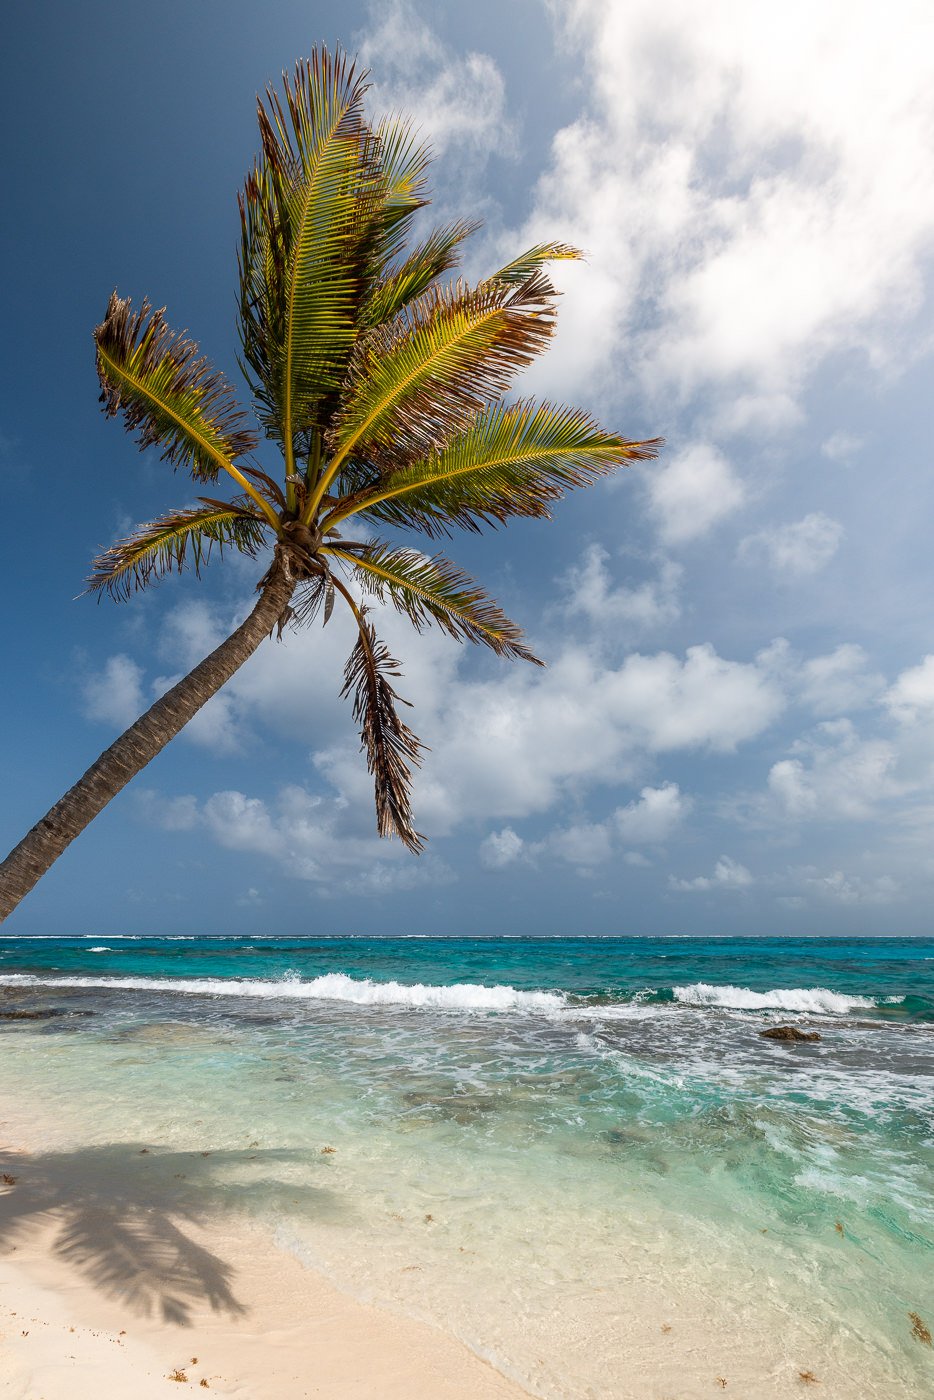 Palm trees and coral reef on Johnny Cay, San Andres